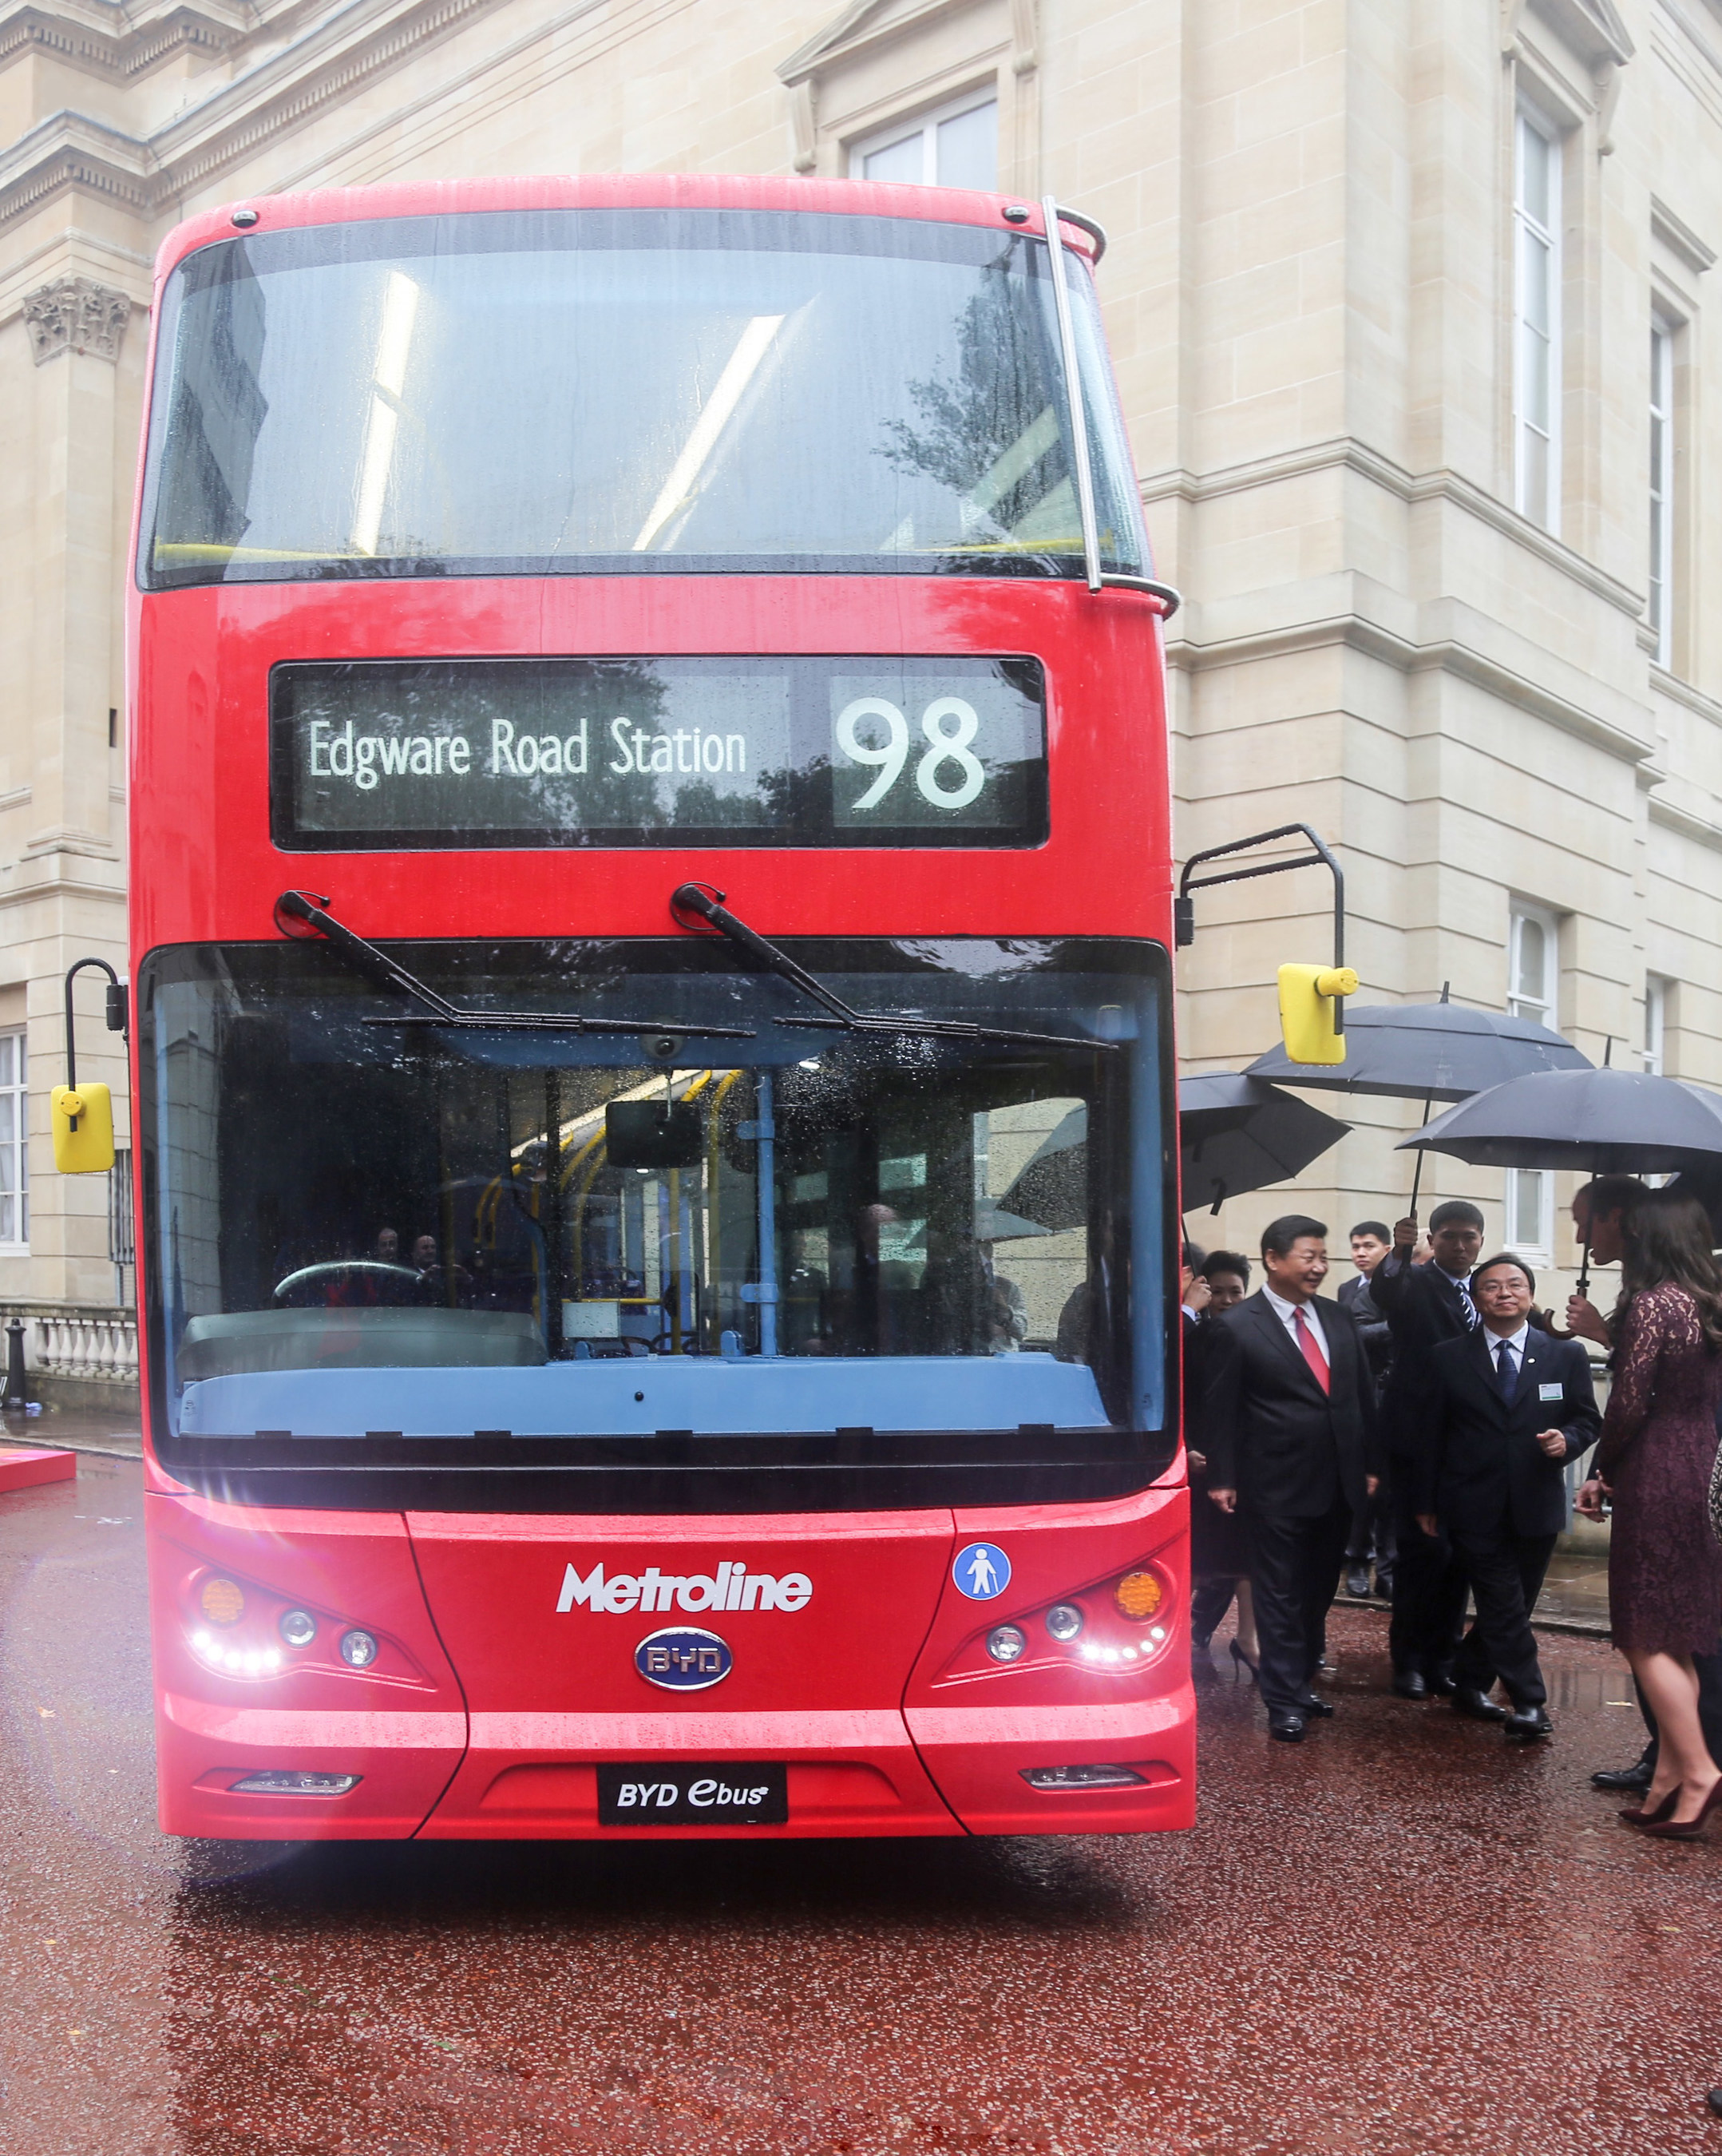 The World's first Electric Double-Decker Bus